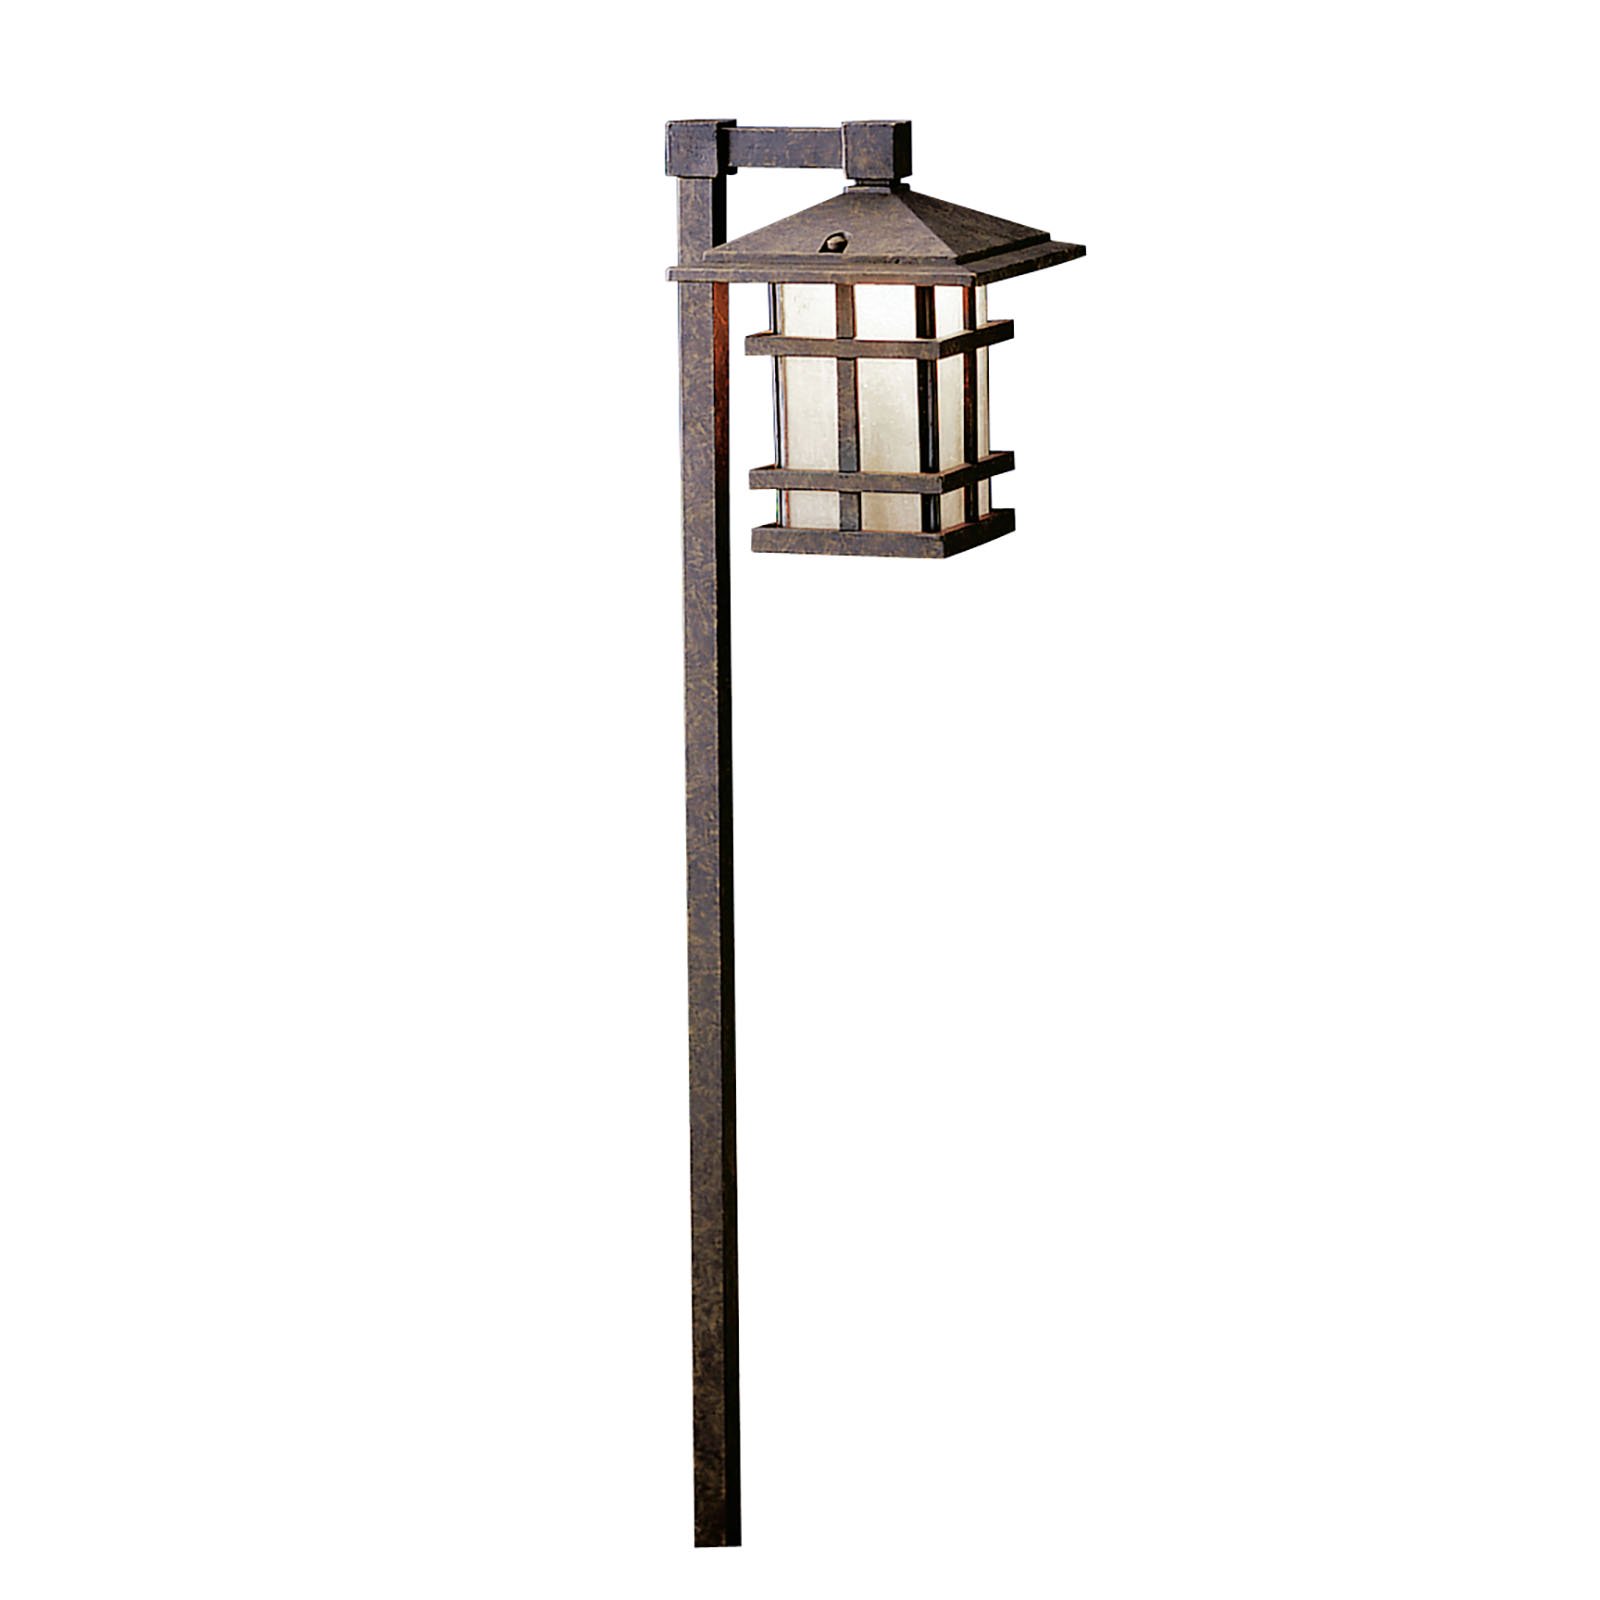 CROSS CREEK PATH LIGHT - Arts and Crafts style path light adds simplicity to affluent homes.